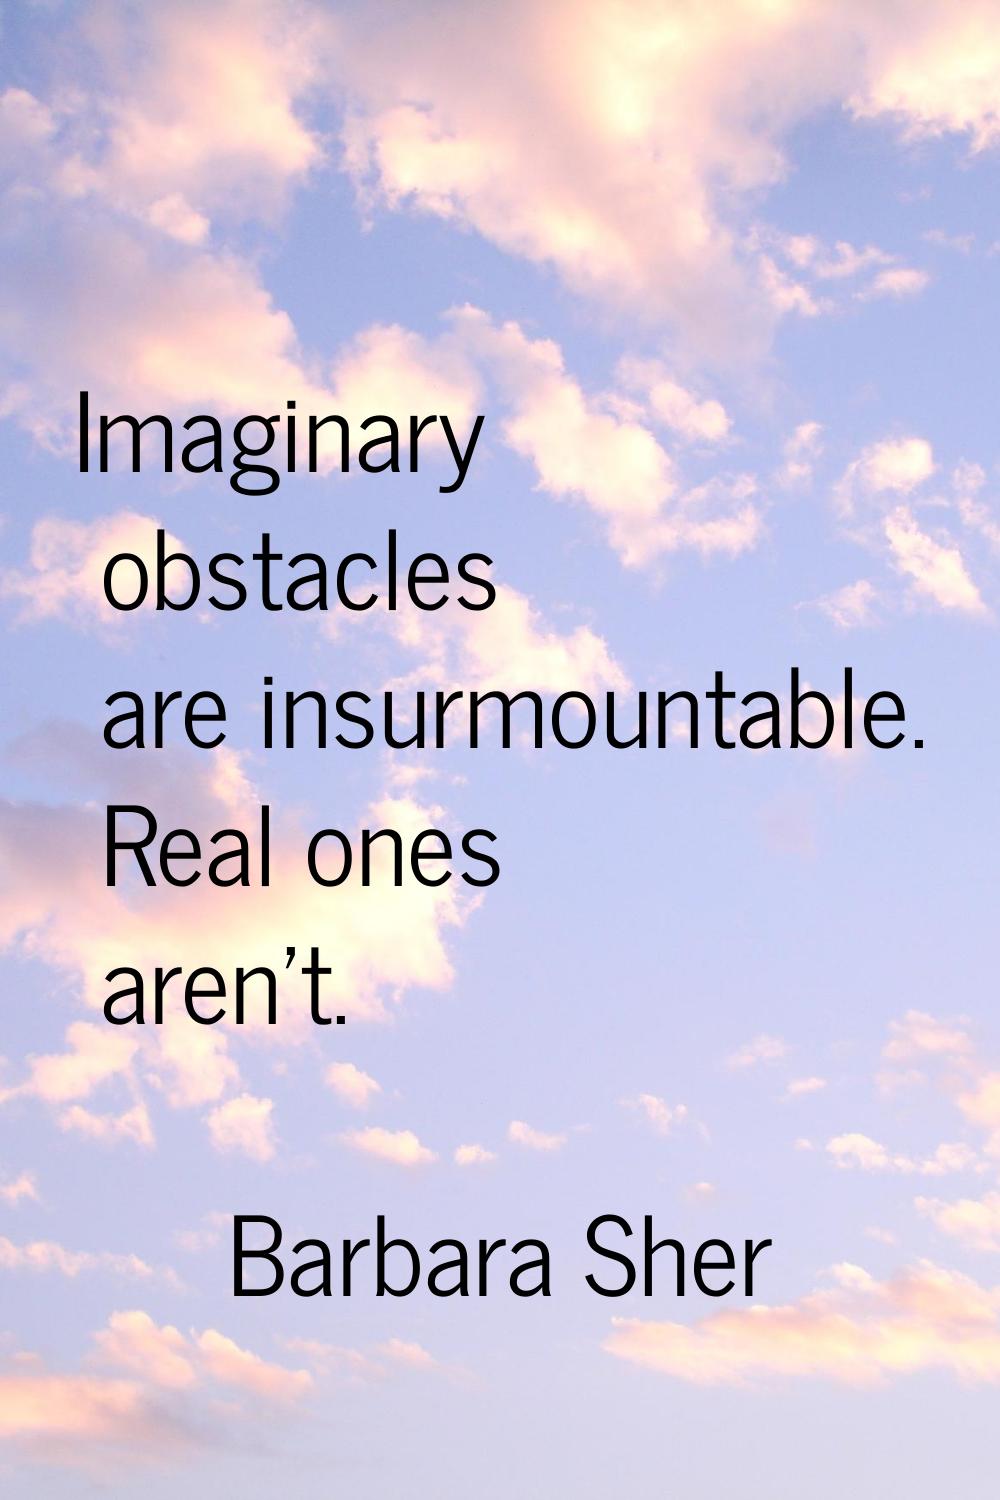 Imaginary obstacles are insurmountable. Real ones aren't.